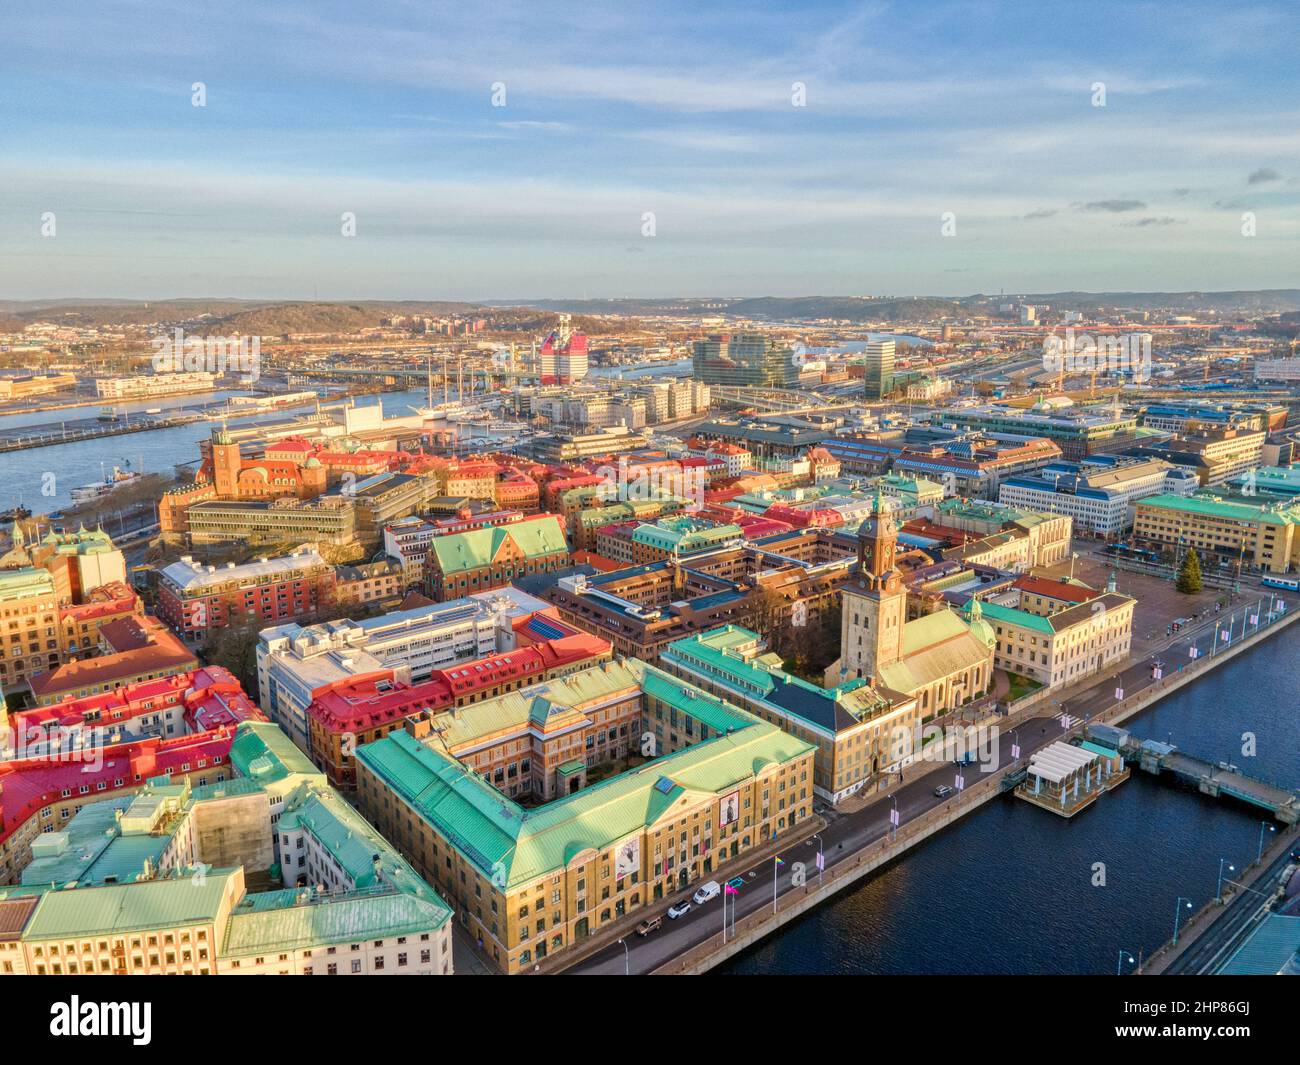 Gothenburg, Sweden. View from above of the Christina Church (Tyska Church) located in the heart of Göteborg, close to the Gustav Adolfs Torg square Stock Photo